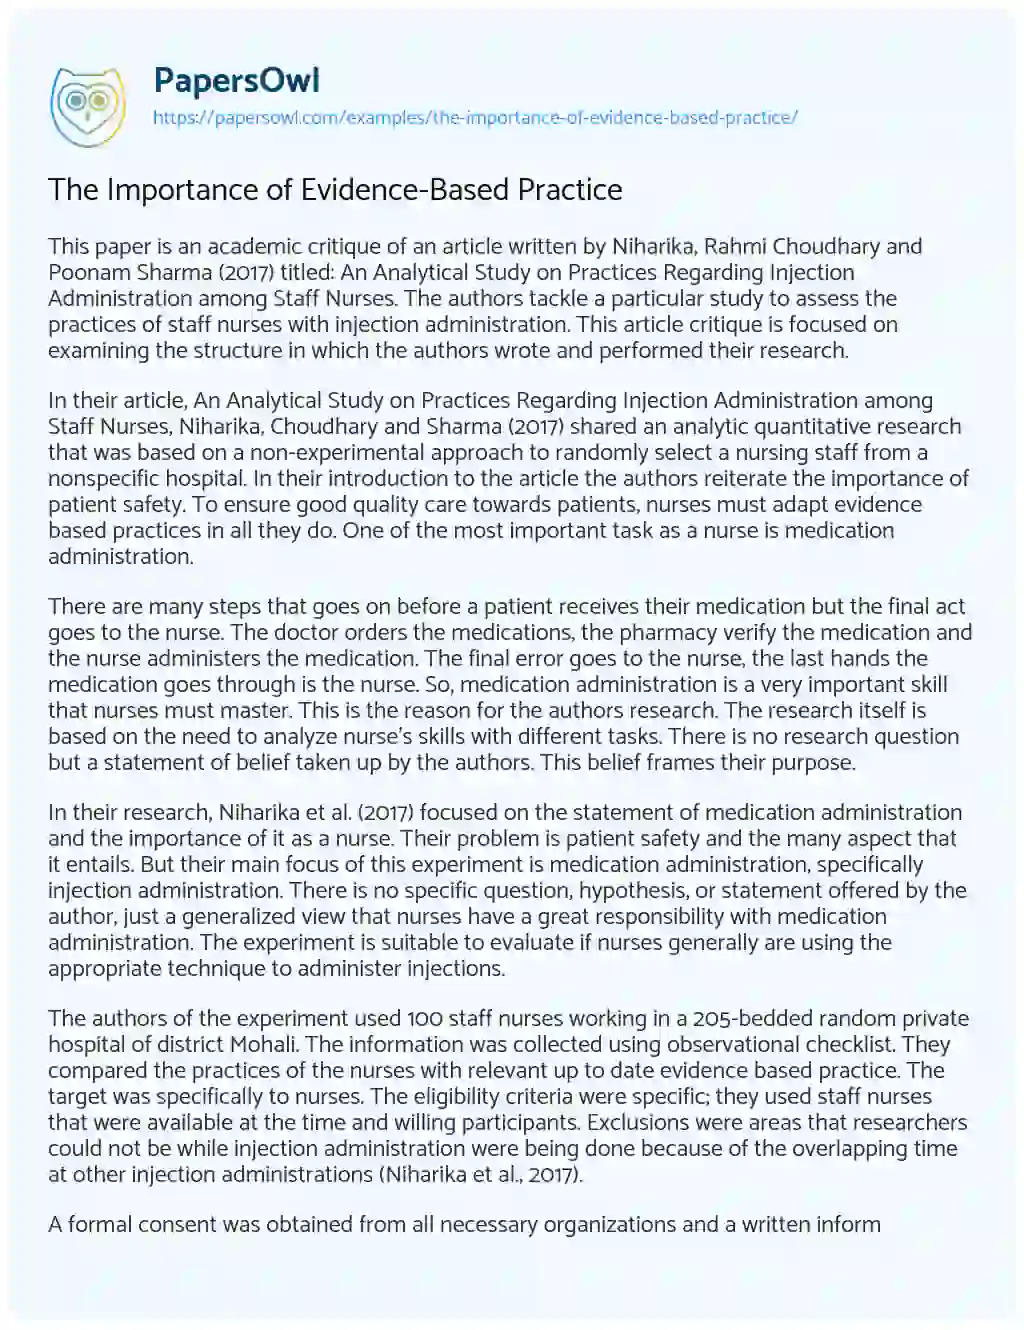 Essay on The Importance of Evidence-Based Practice